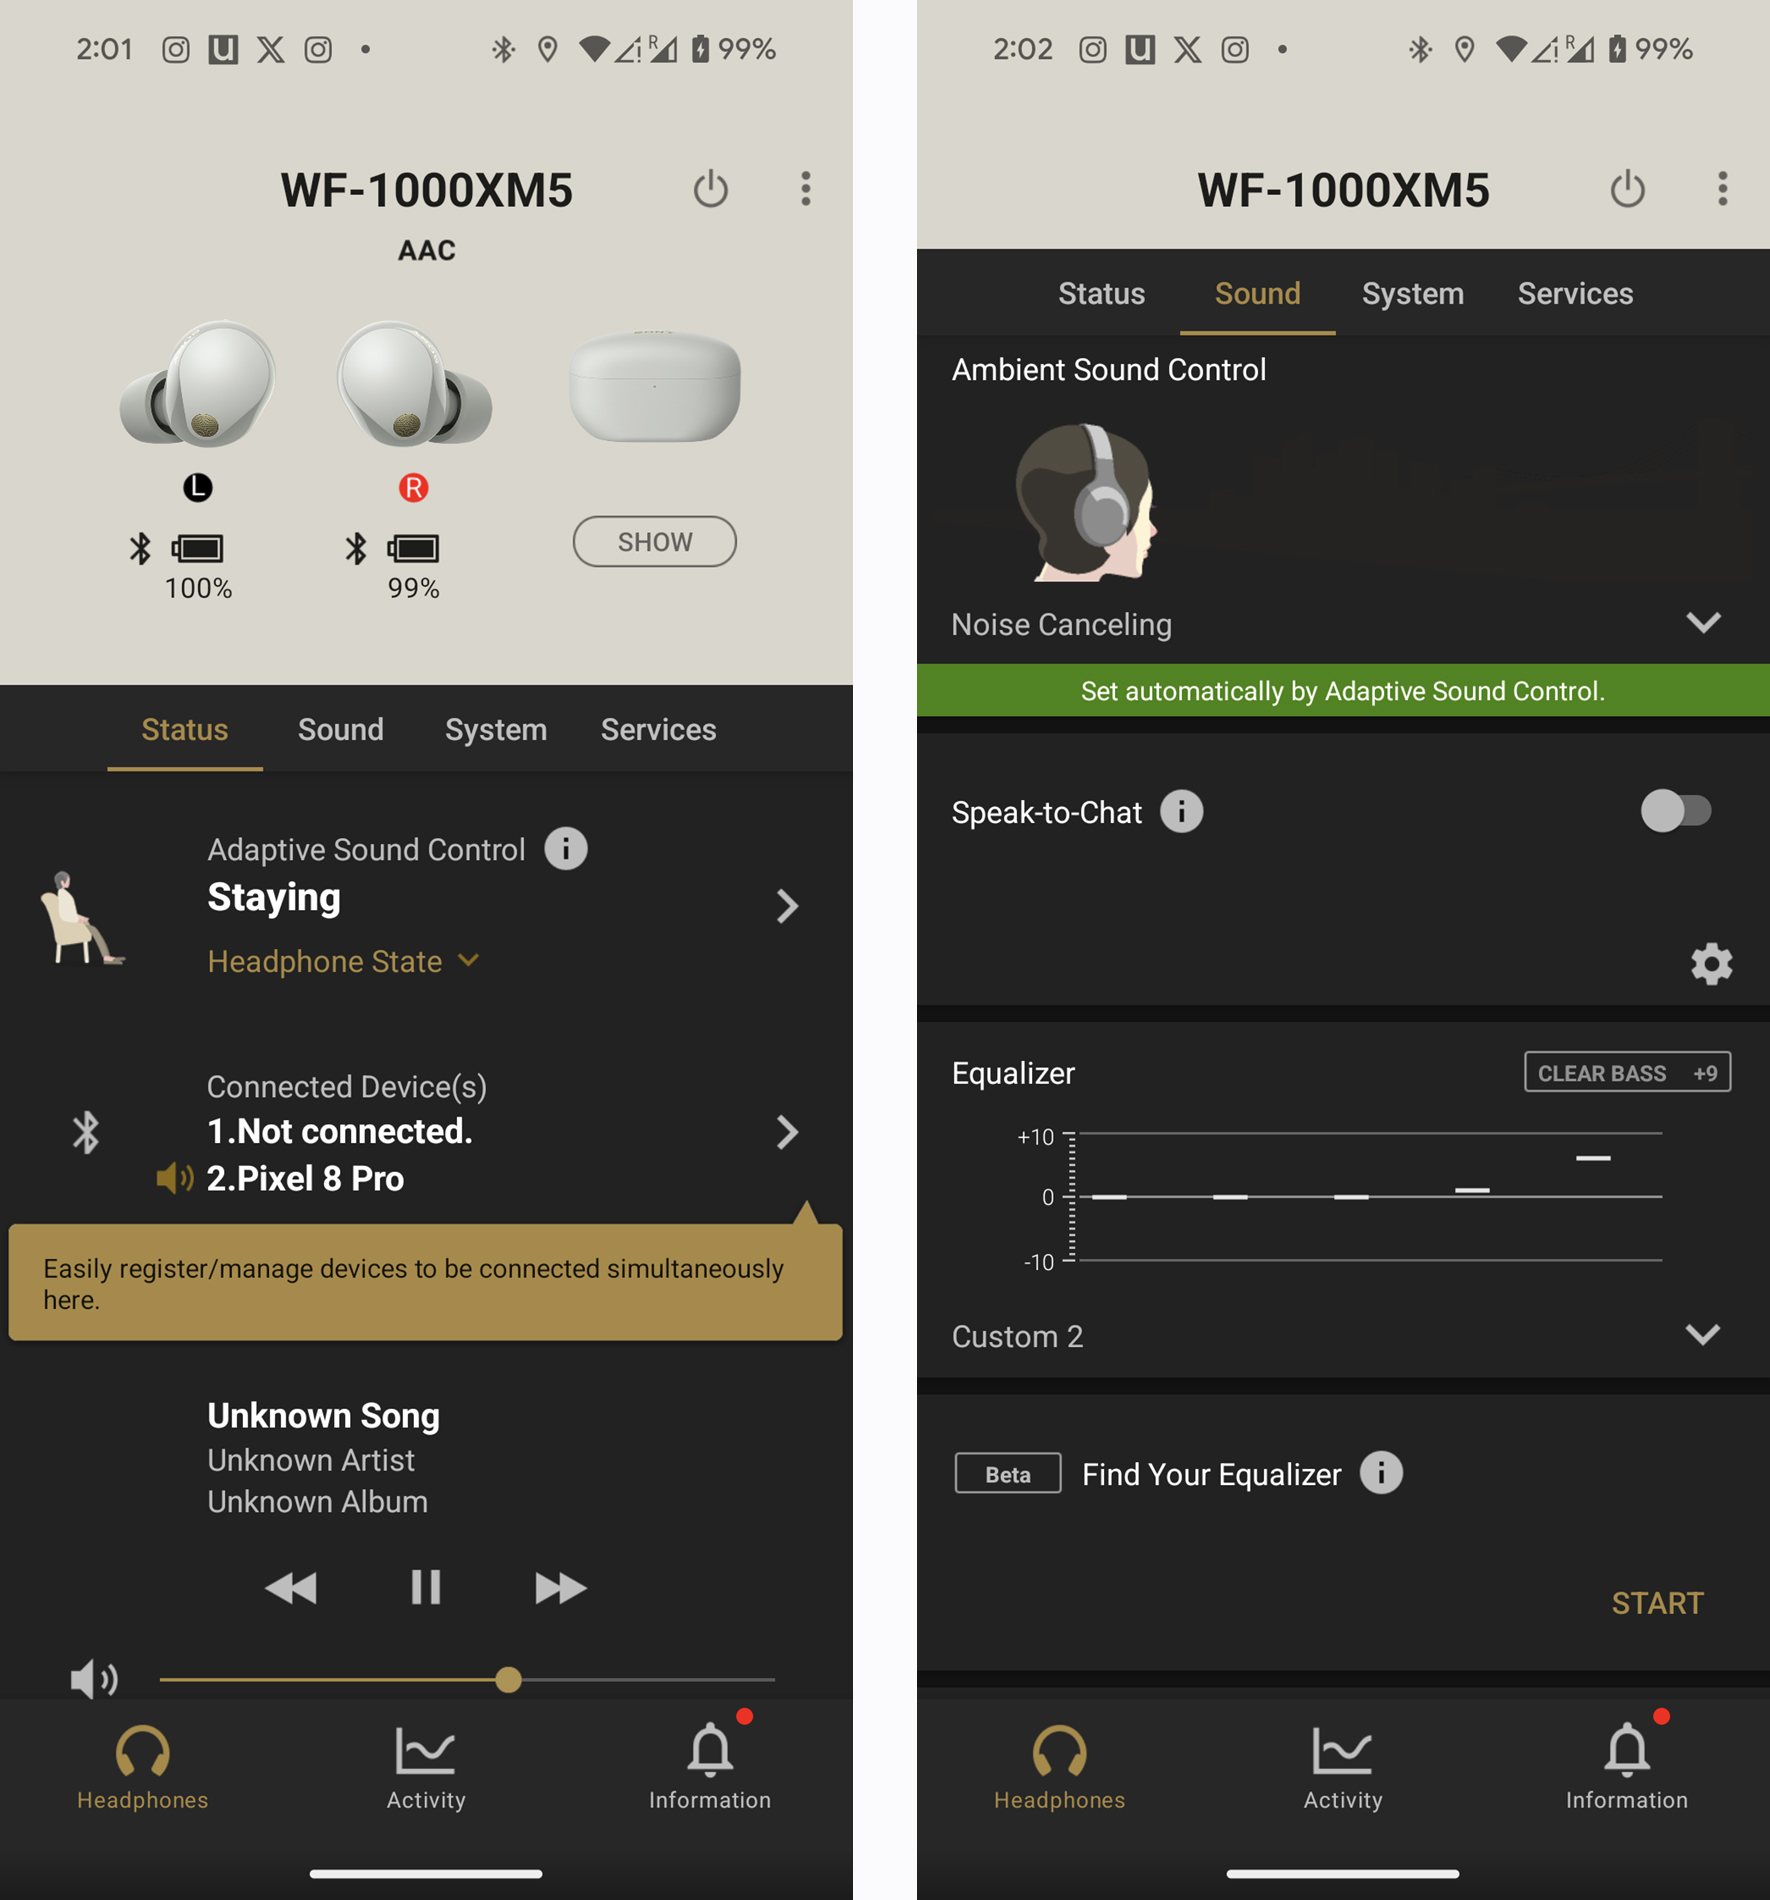 Screenshots from Sony Headphones Connect app for WF-1000XM5 earbuds.